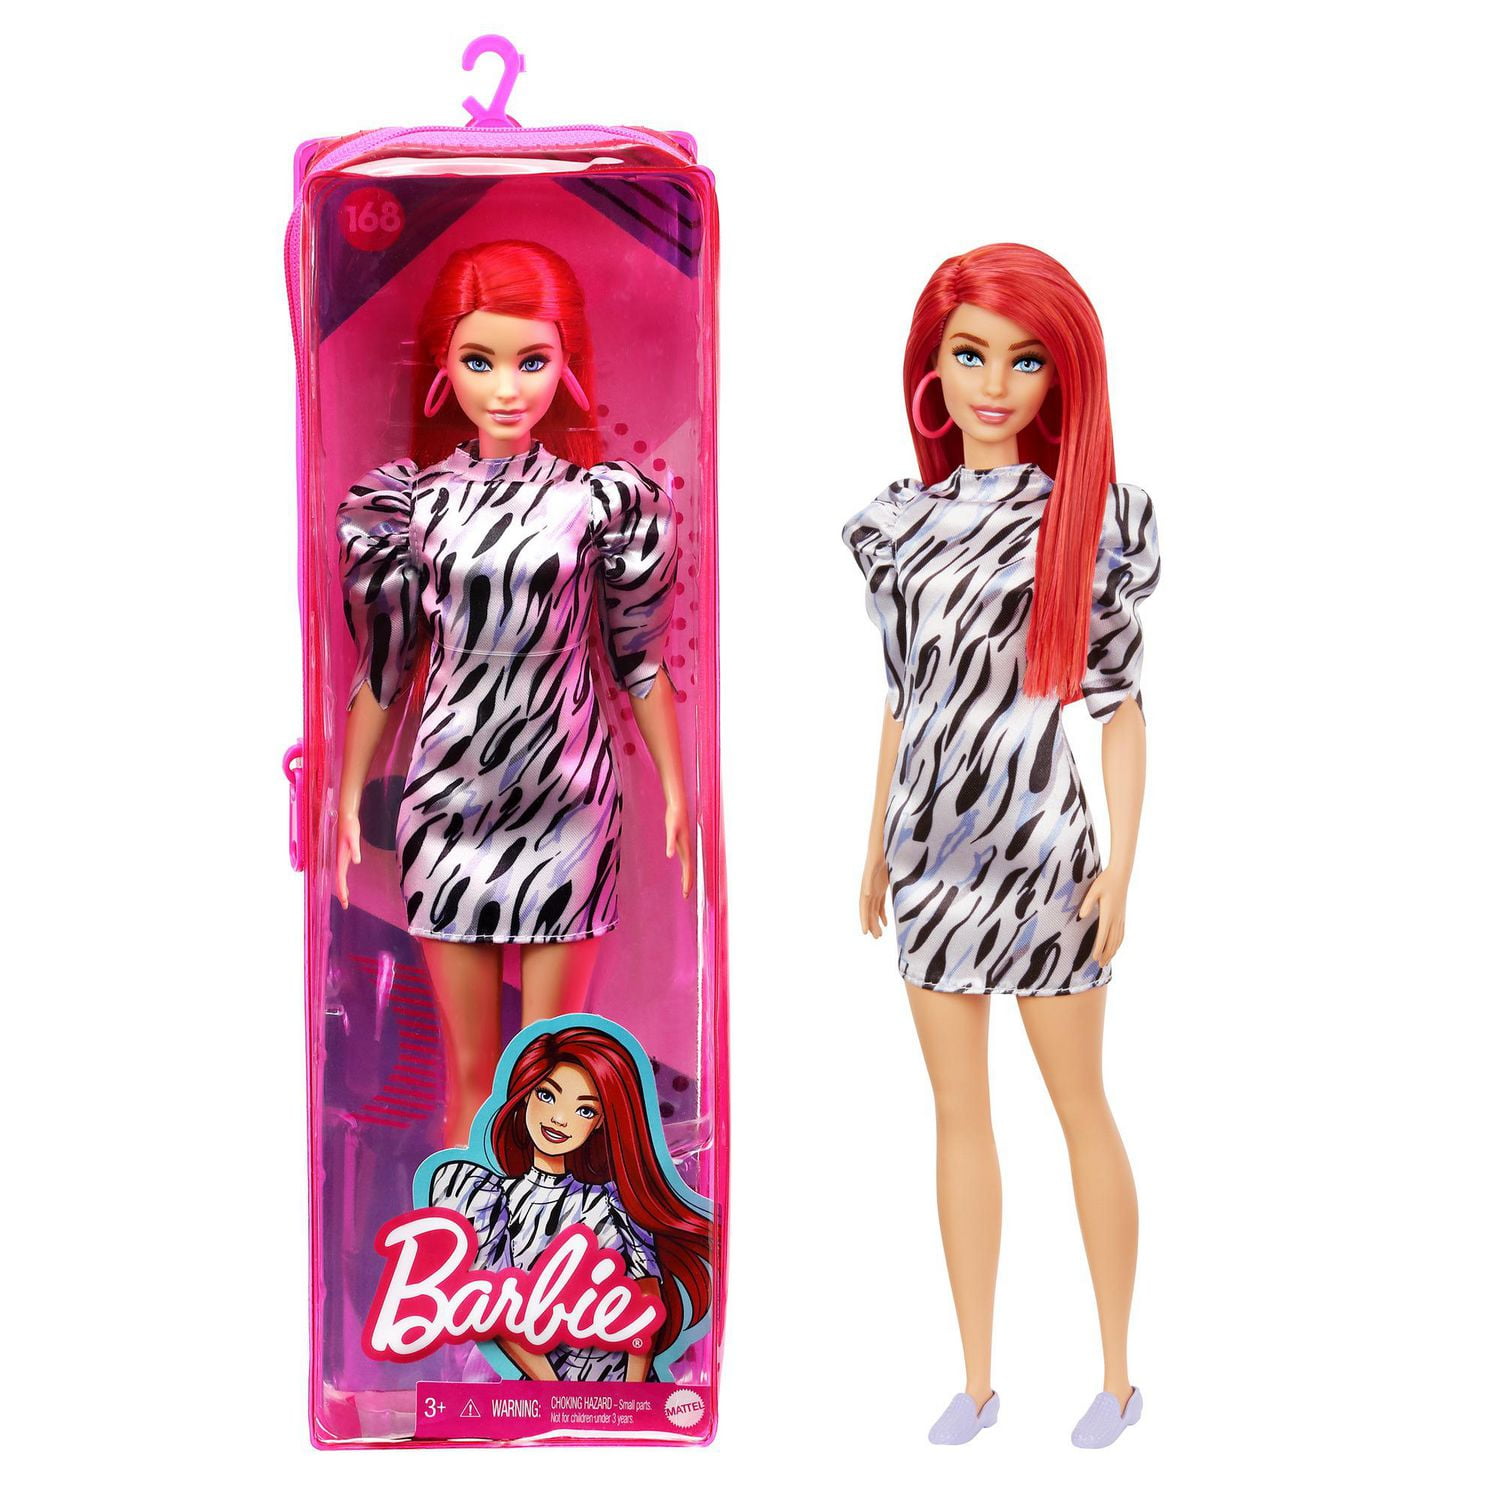  Barbie Fashionistas Ultimate Closet Portable Fashion Toy for 3  to 8 Year Olds : Toys & Games